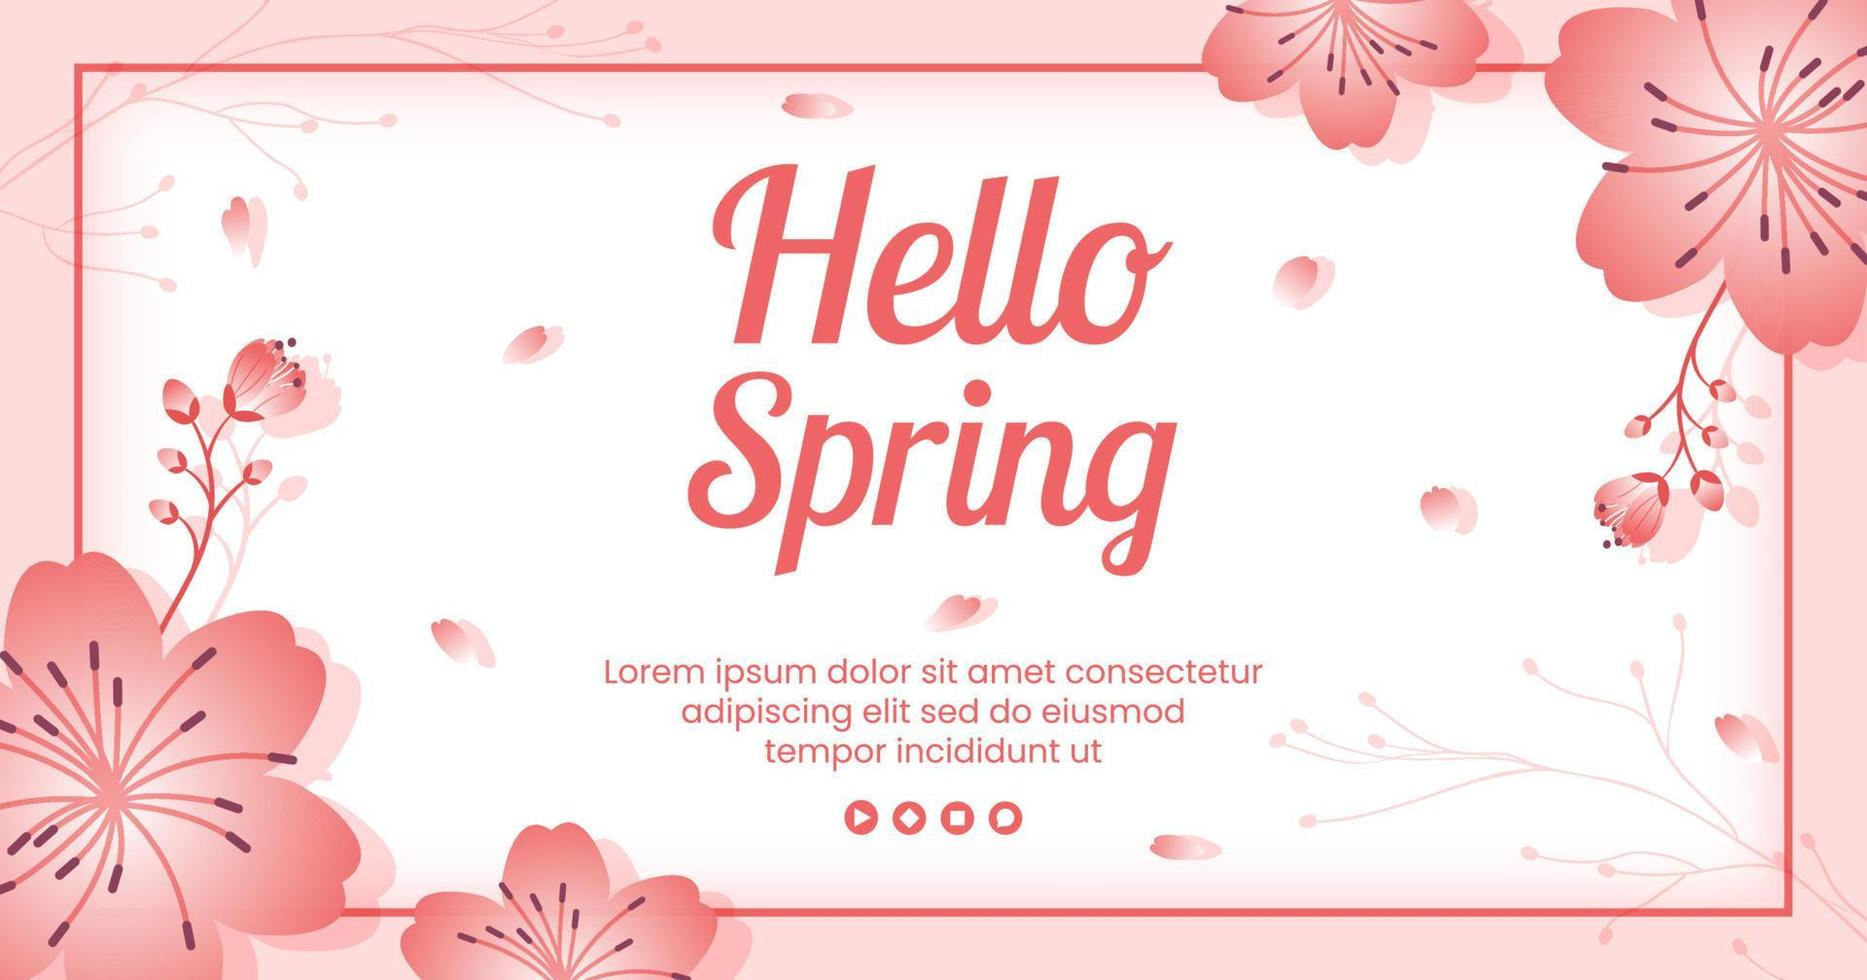 Spring with Blossom Sakura Flowers Post Template Flat Illustration Editable of Square Background for Social Media or Greeting Card vector